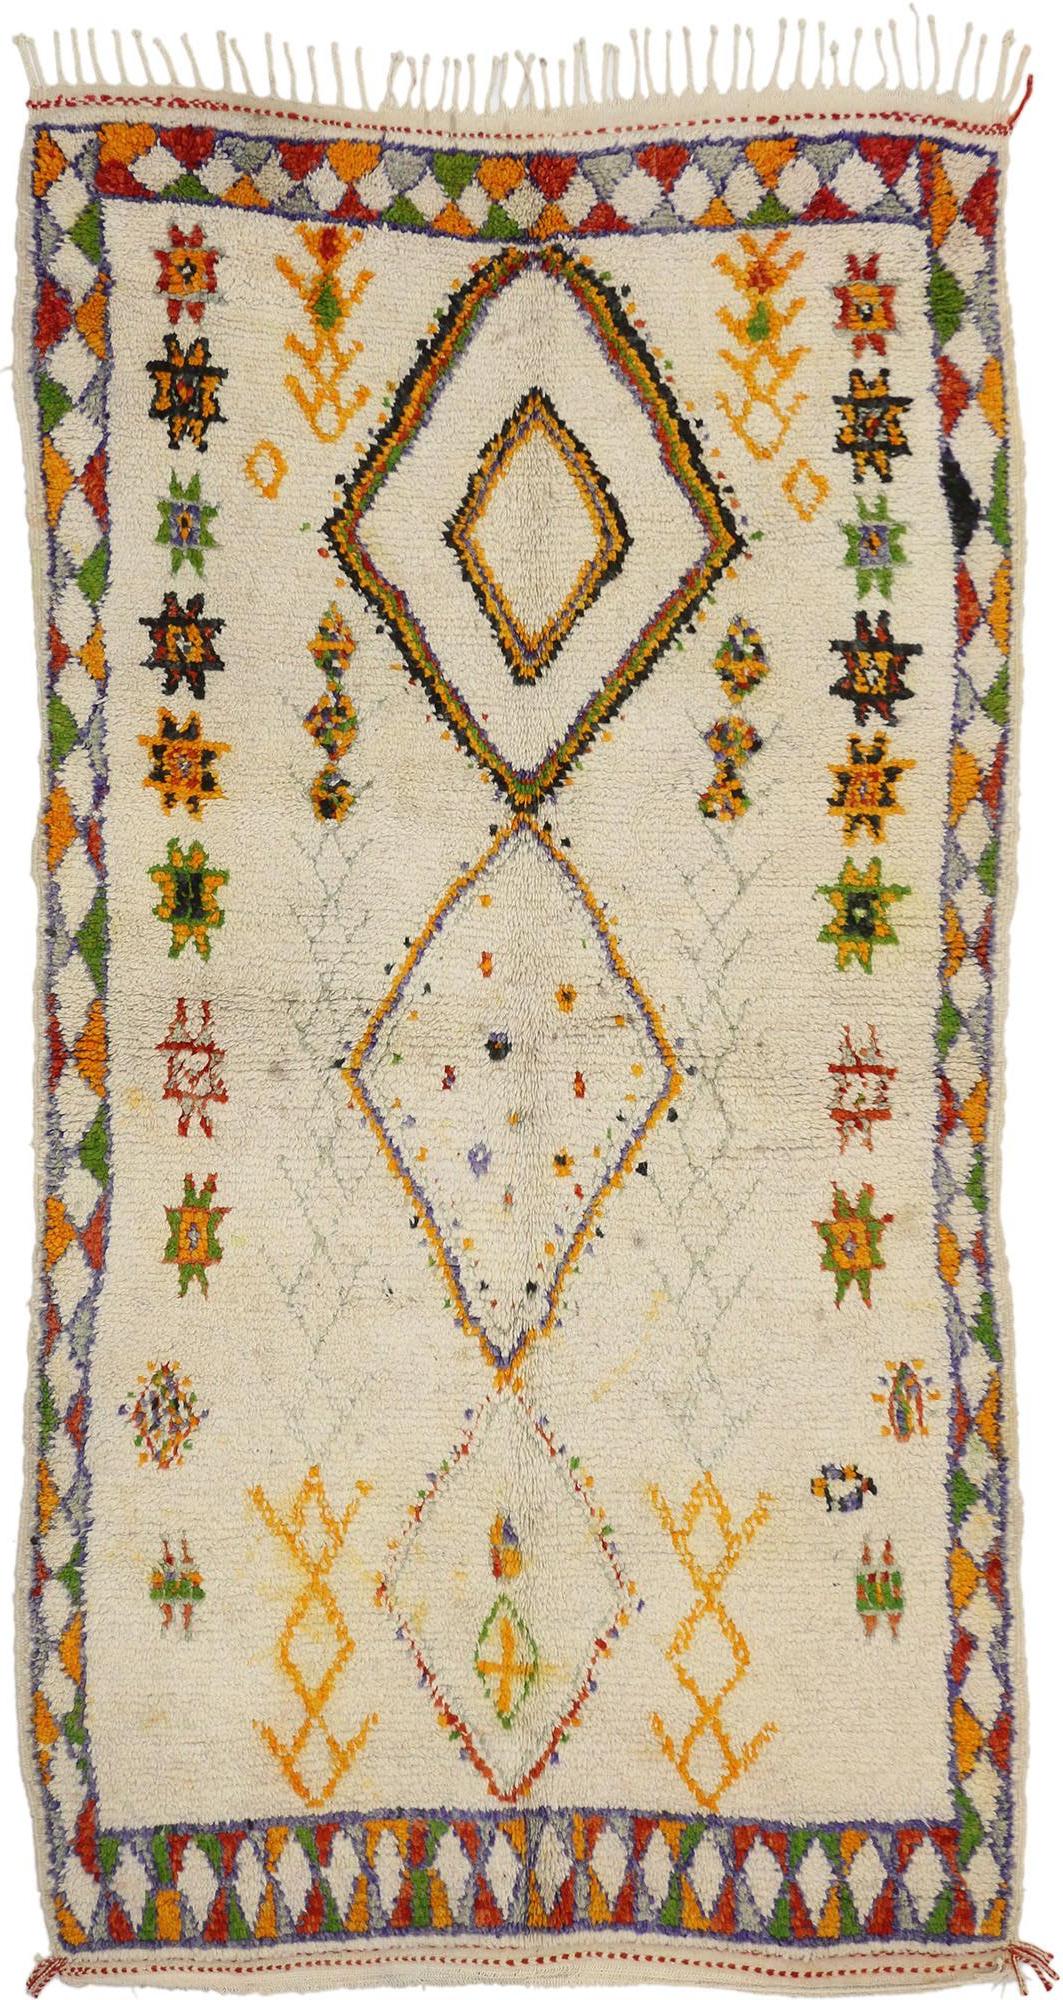 74704 Vintage Berber Moroccan Azilal Rug with Tribal Style. The Moroccan carpets and rugs are part of North Africa's renowned indigenous tribe weaving. This hand-knotted wool vintage Moroccan Azilal rug features three grand scale diamonds that are